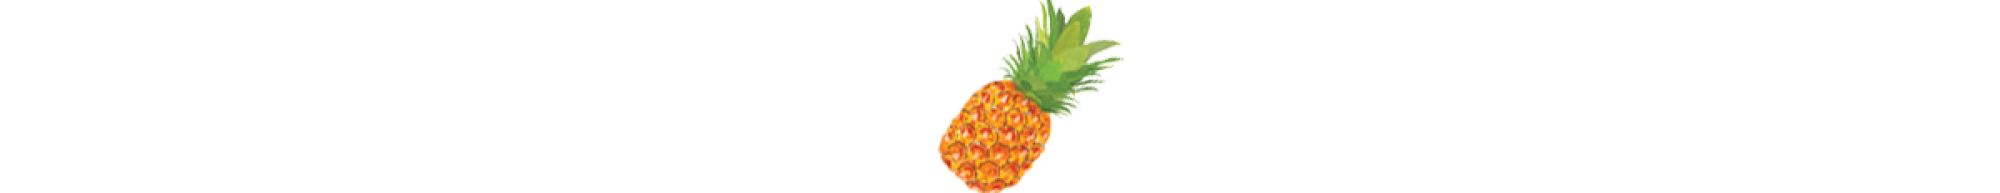 An illustration of a pineapple